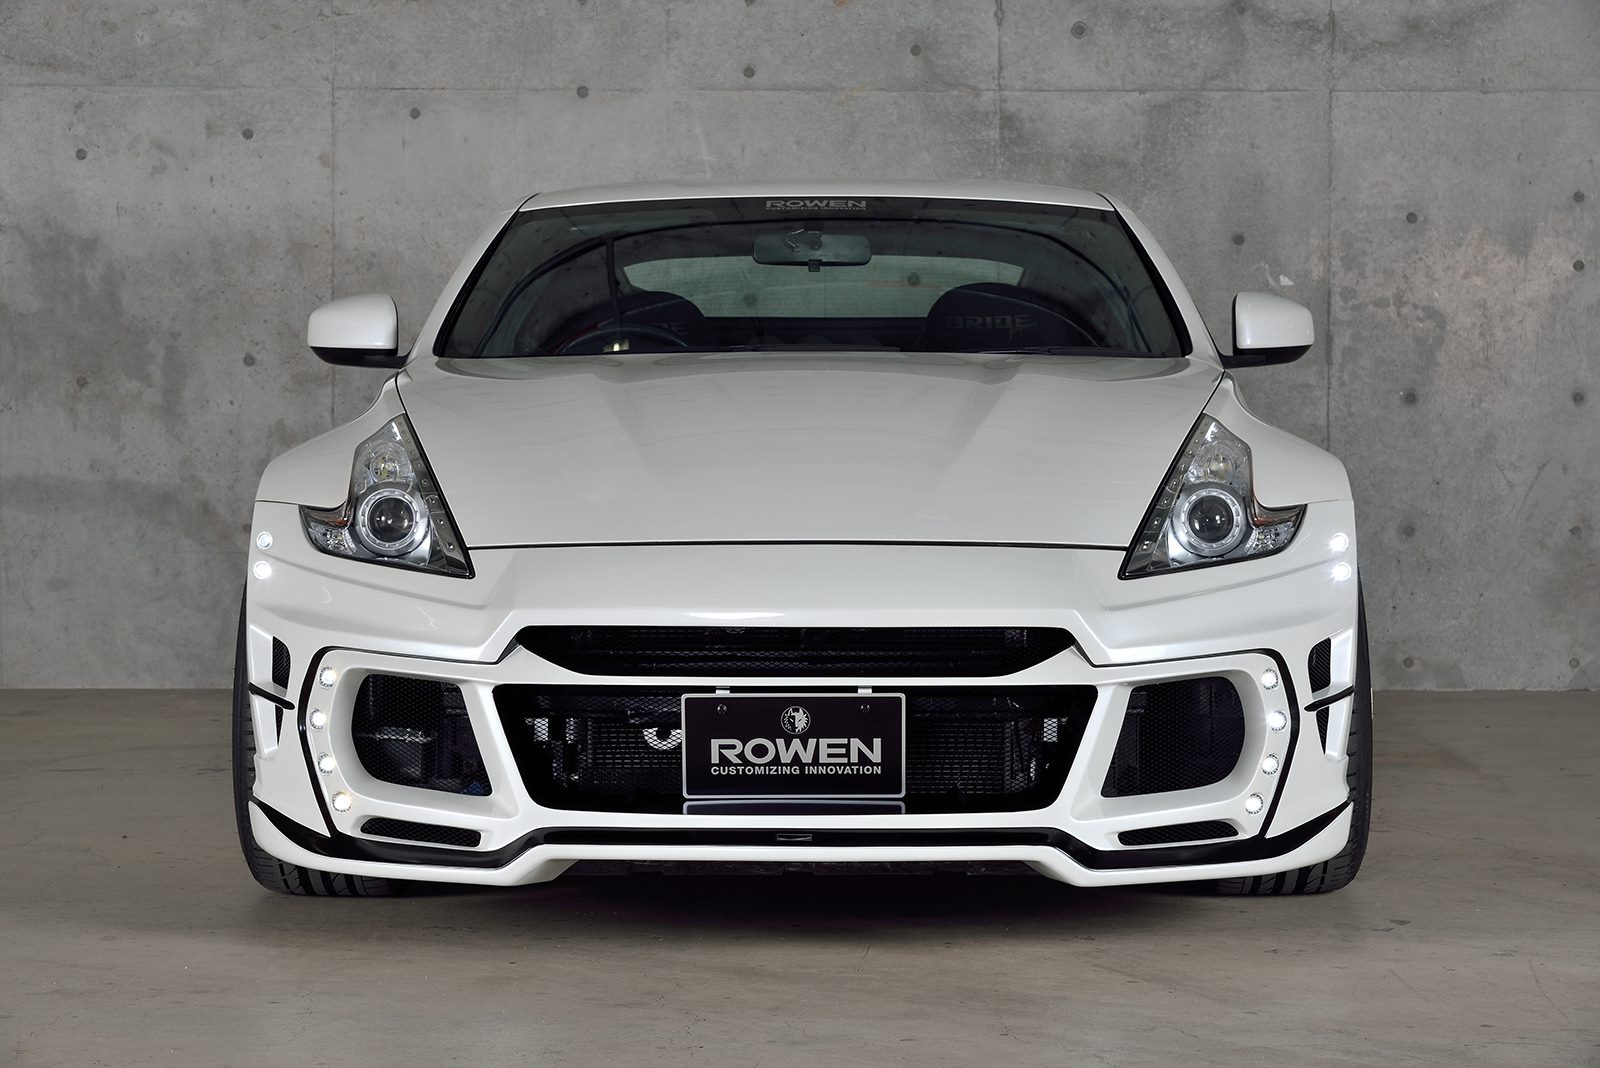 Rowen Body Kit for Nissan 370Z Is Filled with JDM Goodness - autoevolution